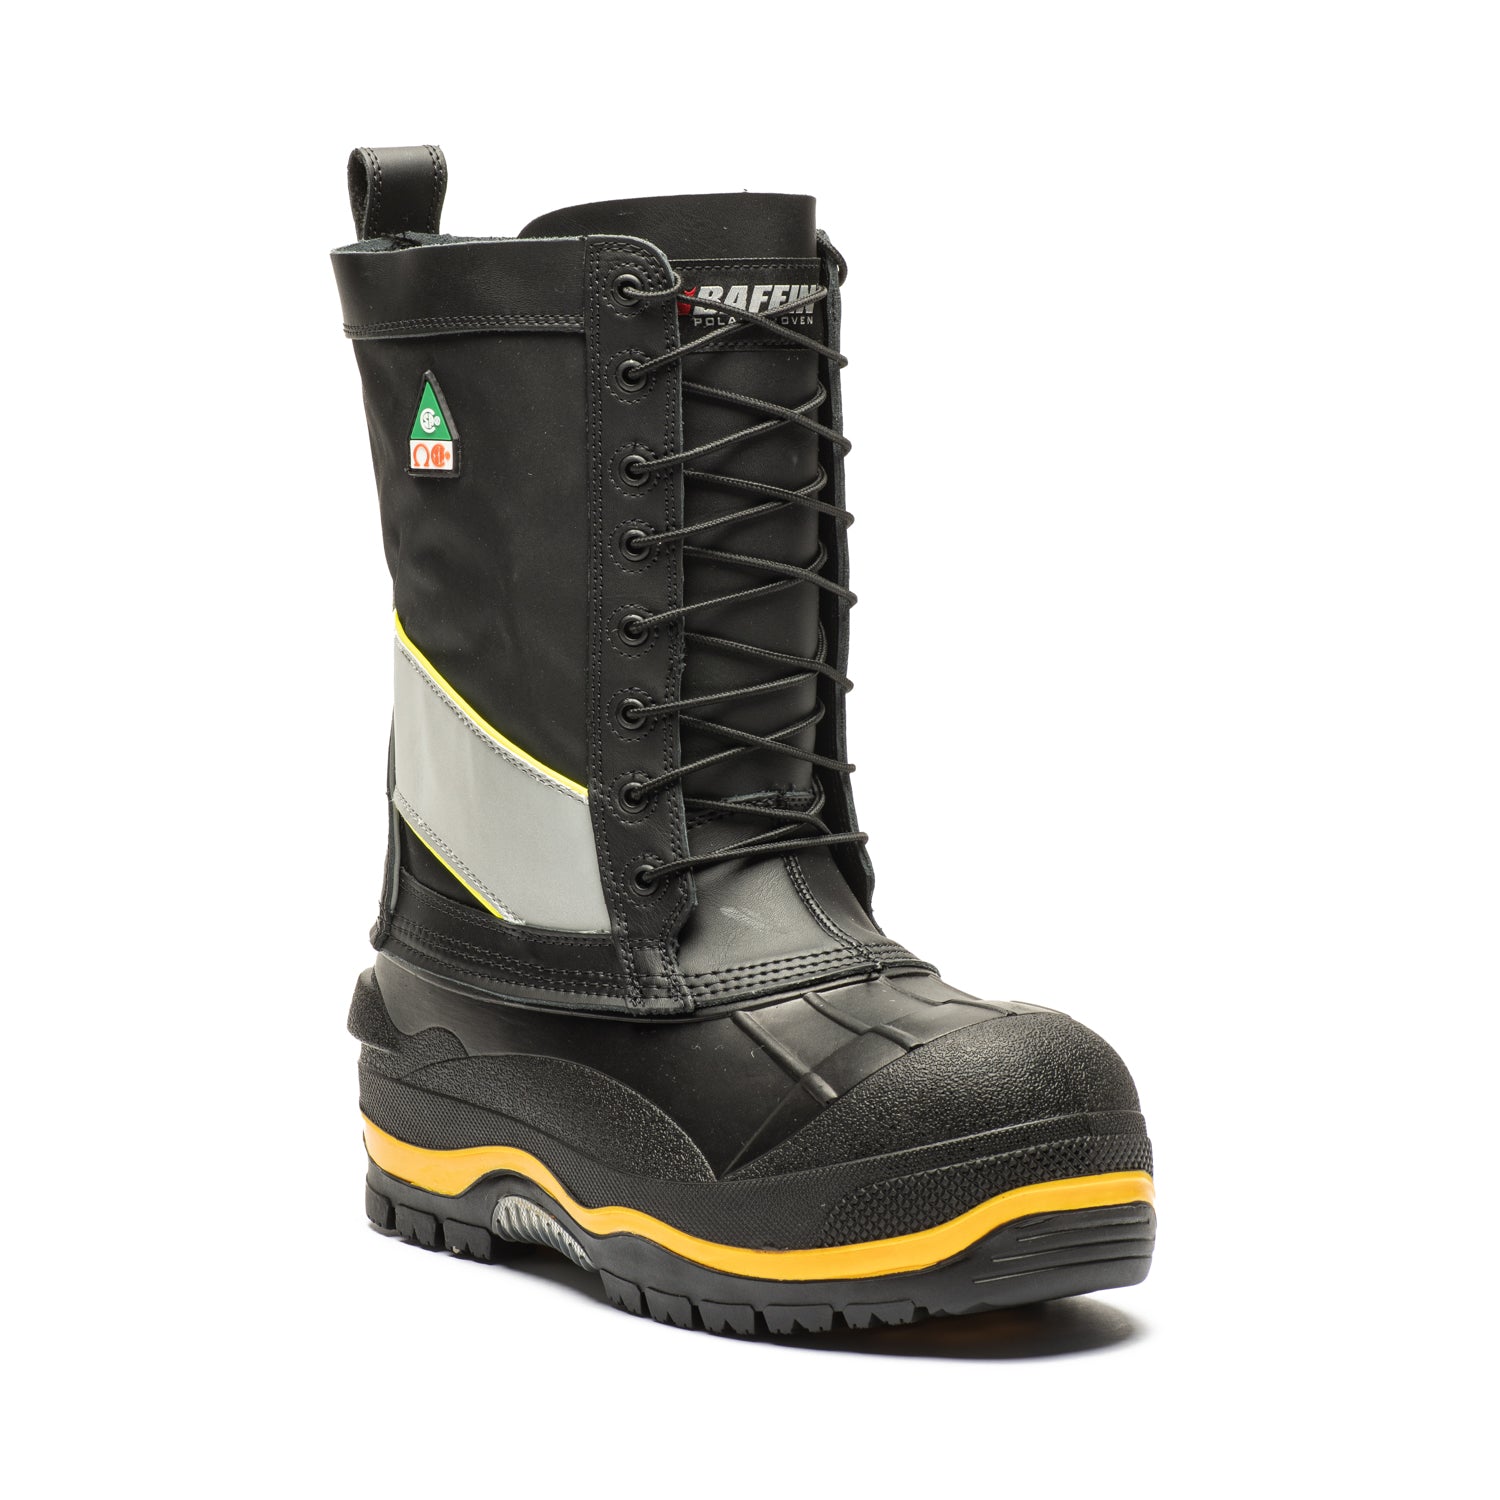 composite toe cold weather boots